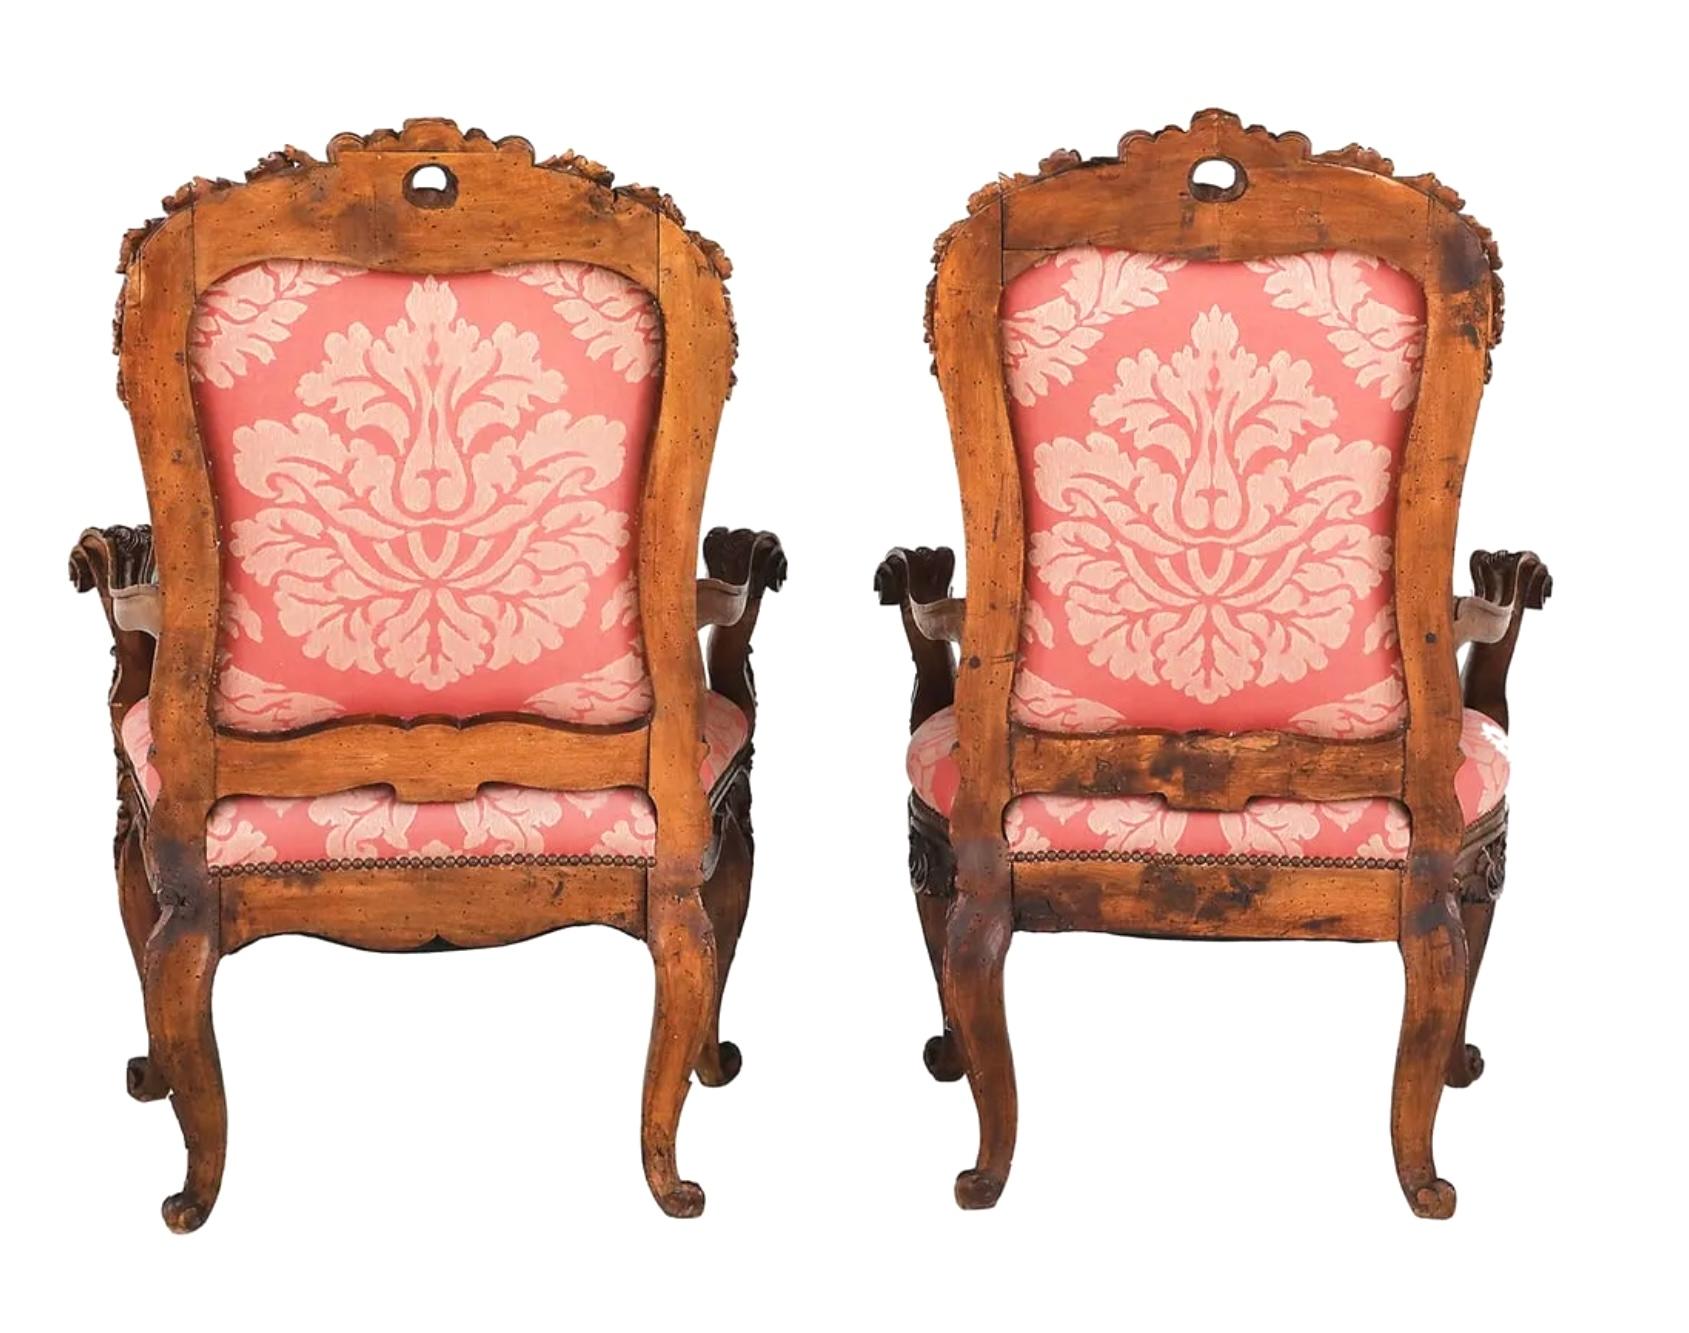 Late 19th century large pair of Italian Armchairs.  Each exuberantly carved example with a padded back surmounted by a pierced foliate and floral crest, joined by scrolling arms to the like seat, raised on cabriole legs ending in scrolled toes. They